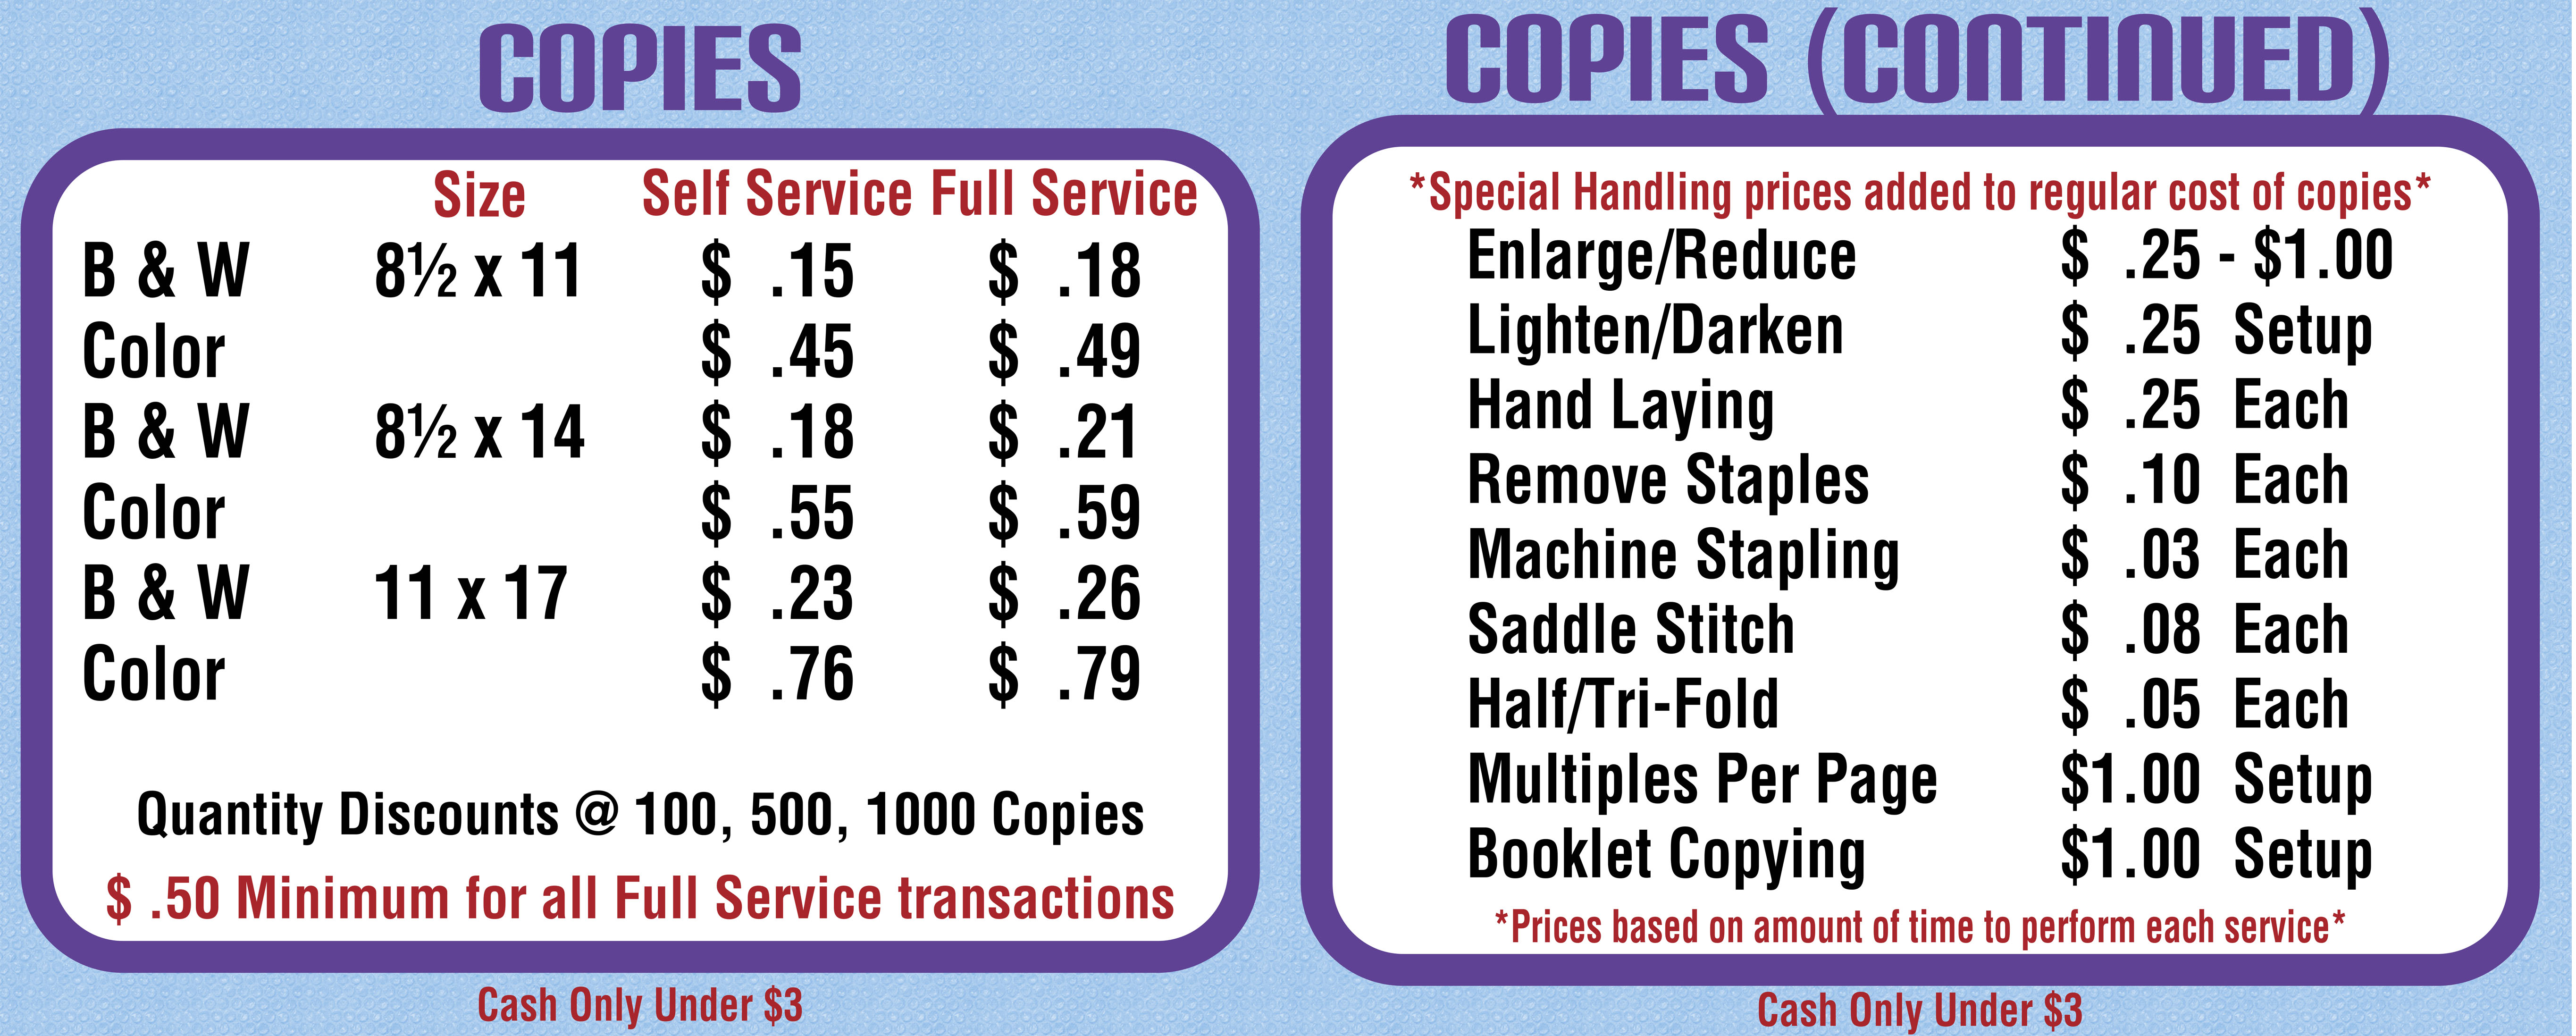 copying prices at gentilly mail and copy center in new orleans